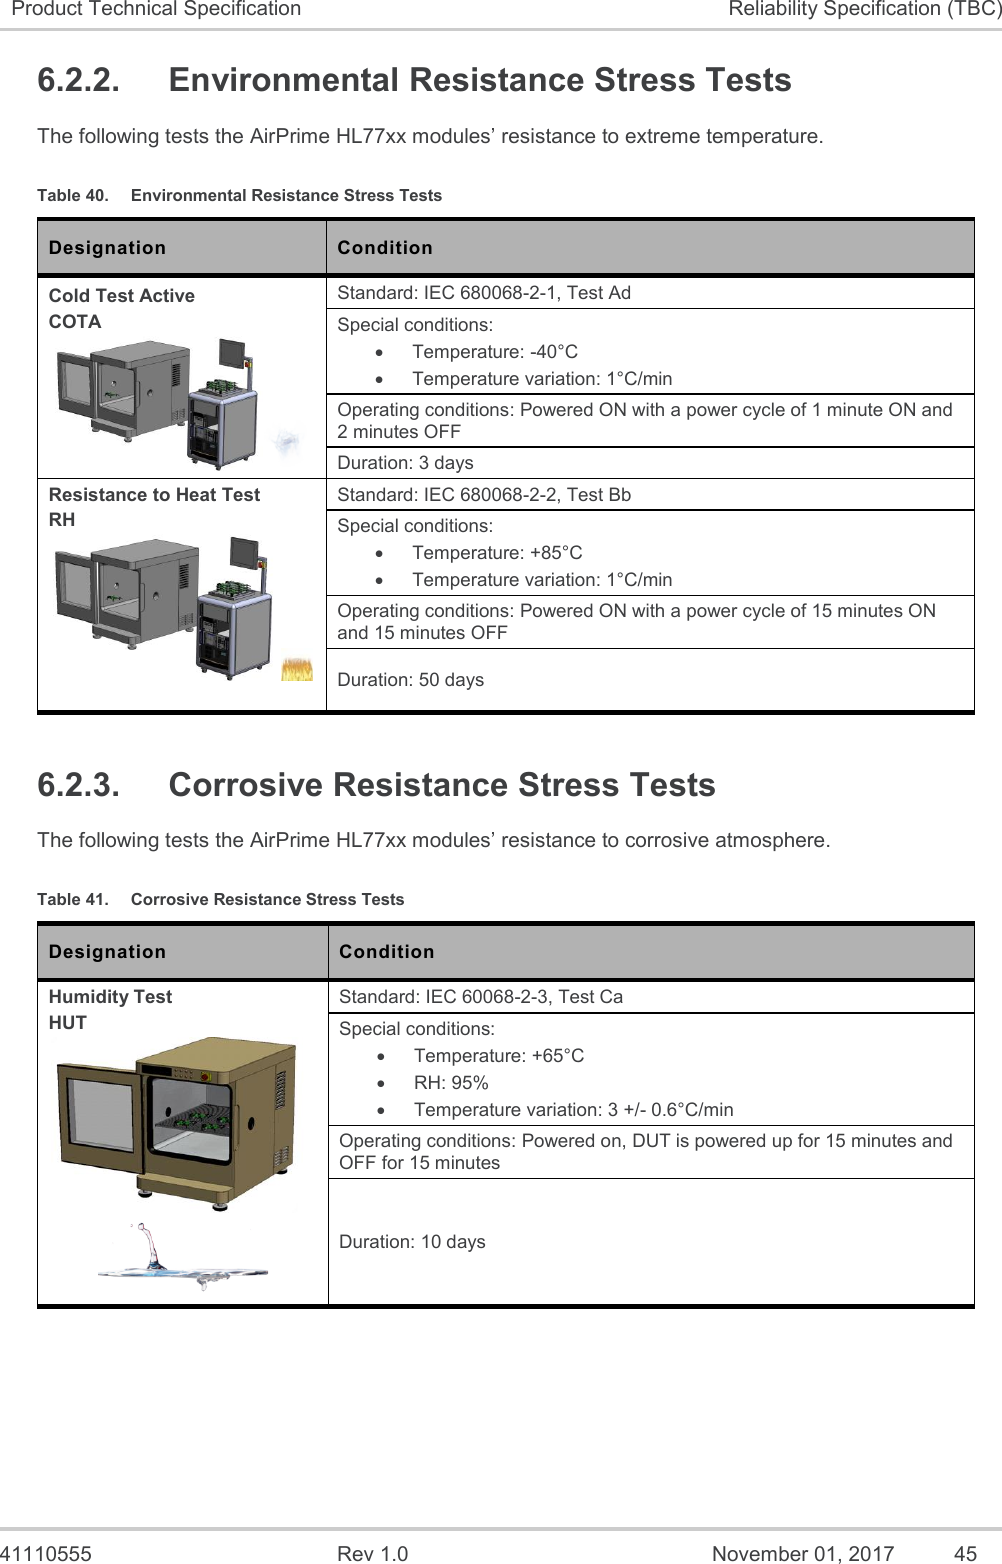   41110555  Rev 1.0  November 01, 2017  45 Product Technical Specification Reliability Specification (TBC) 6.2.2.  Environmental Resistance Stress Tests The following tests the AirPrime HL77xx modules’ resistance to extreme temperature. Table 40.  Environmental Resistance Stress Tests Designation Condition Cold Test Active COTA  Standard: IEC 680068-2-1, Test Ad Special conditions: •  Temperature: -40°C •  Temperature variation: 1°C/min Operating conditions: Powered ON with a power cycle of 1 minute ON and 2 minutes OFF Duration: 3 days Resistance to Heat Test RH   Standard: IEC 680068-2-2, Test Bb Special conditions: •  Temperature: +85°C •  Temperature variation: 1°C/min  Operating conditions: Powered ON with a power cycle of 15 minutes ON and 15 minutes OFF Duration: 50 days 6.2.3.  Corrosive Resistance Stress Tests The following tests the AirPrime HL77xx modules’ resistance to corrosive atmosphere. Table 41.  Corrosive Resistance Stress Tests Designation Condition Humidity Test HUT   Standard: IEC 60068-2-3, Test Ca Special conditions: •  Temperature: +65°C •  RH: 95% •  Temperature variation: 3 +/- 0.6°C/min  Operating conditions: Powered on, DUT is powered up for 15 minutes and OFF for 15 minutes Duration: 10 days 